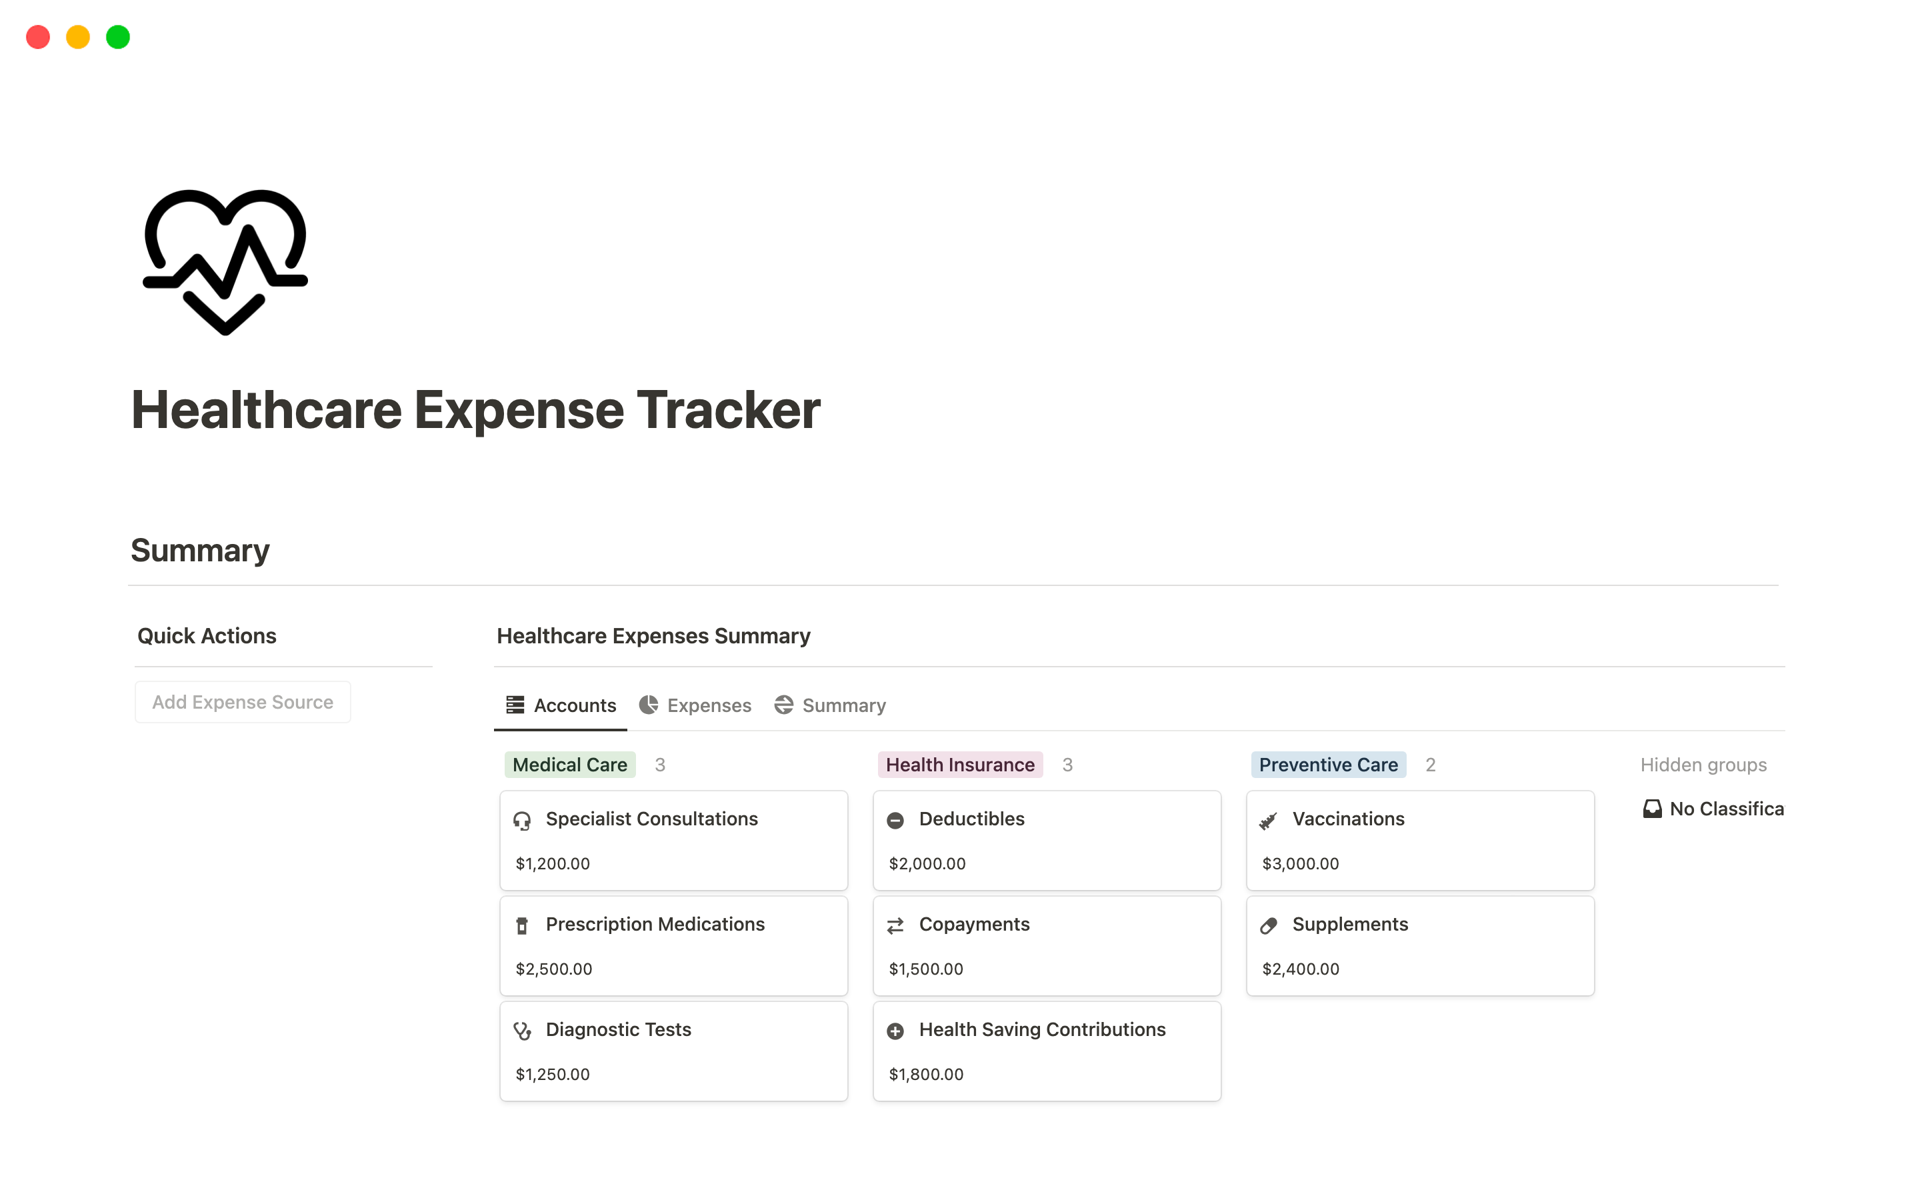 This tool is useful for individuals or families with high medical expenses, this tracker helps monitor healthcare costs, insurance claims, and medical savings accounts.